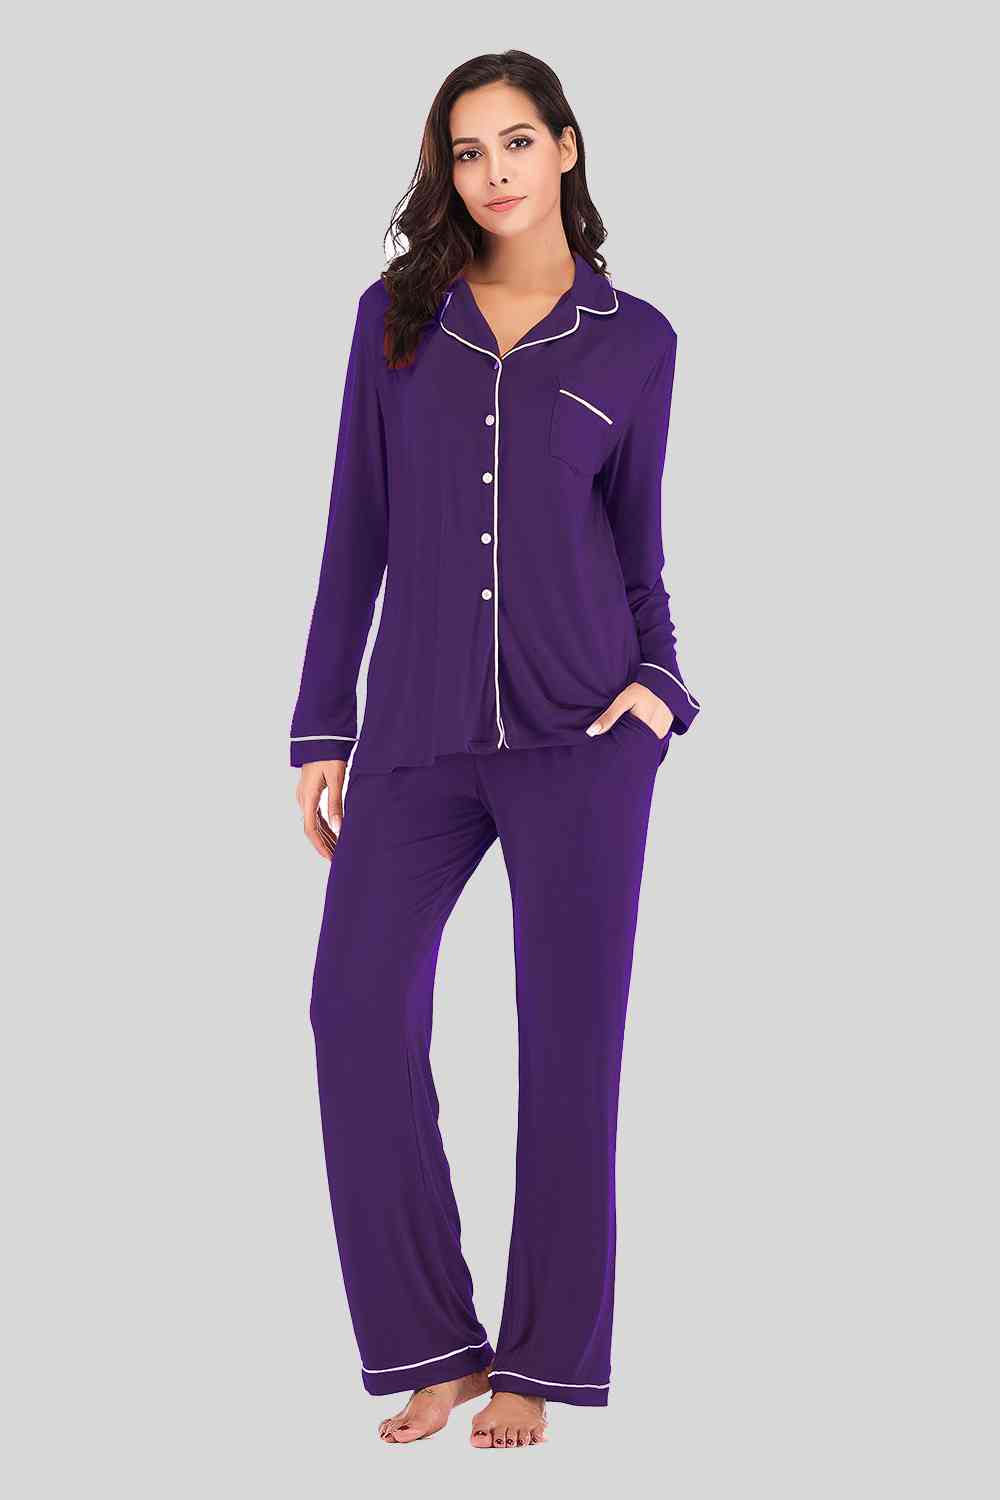 Collared Neck Long Sleeve Loungewear Set with Pockets BLUE ZONE PLANET